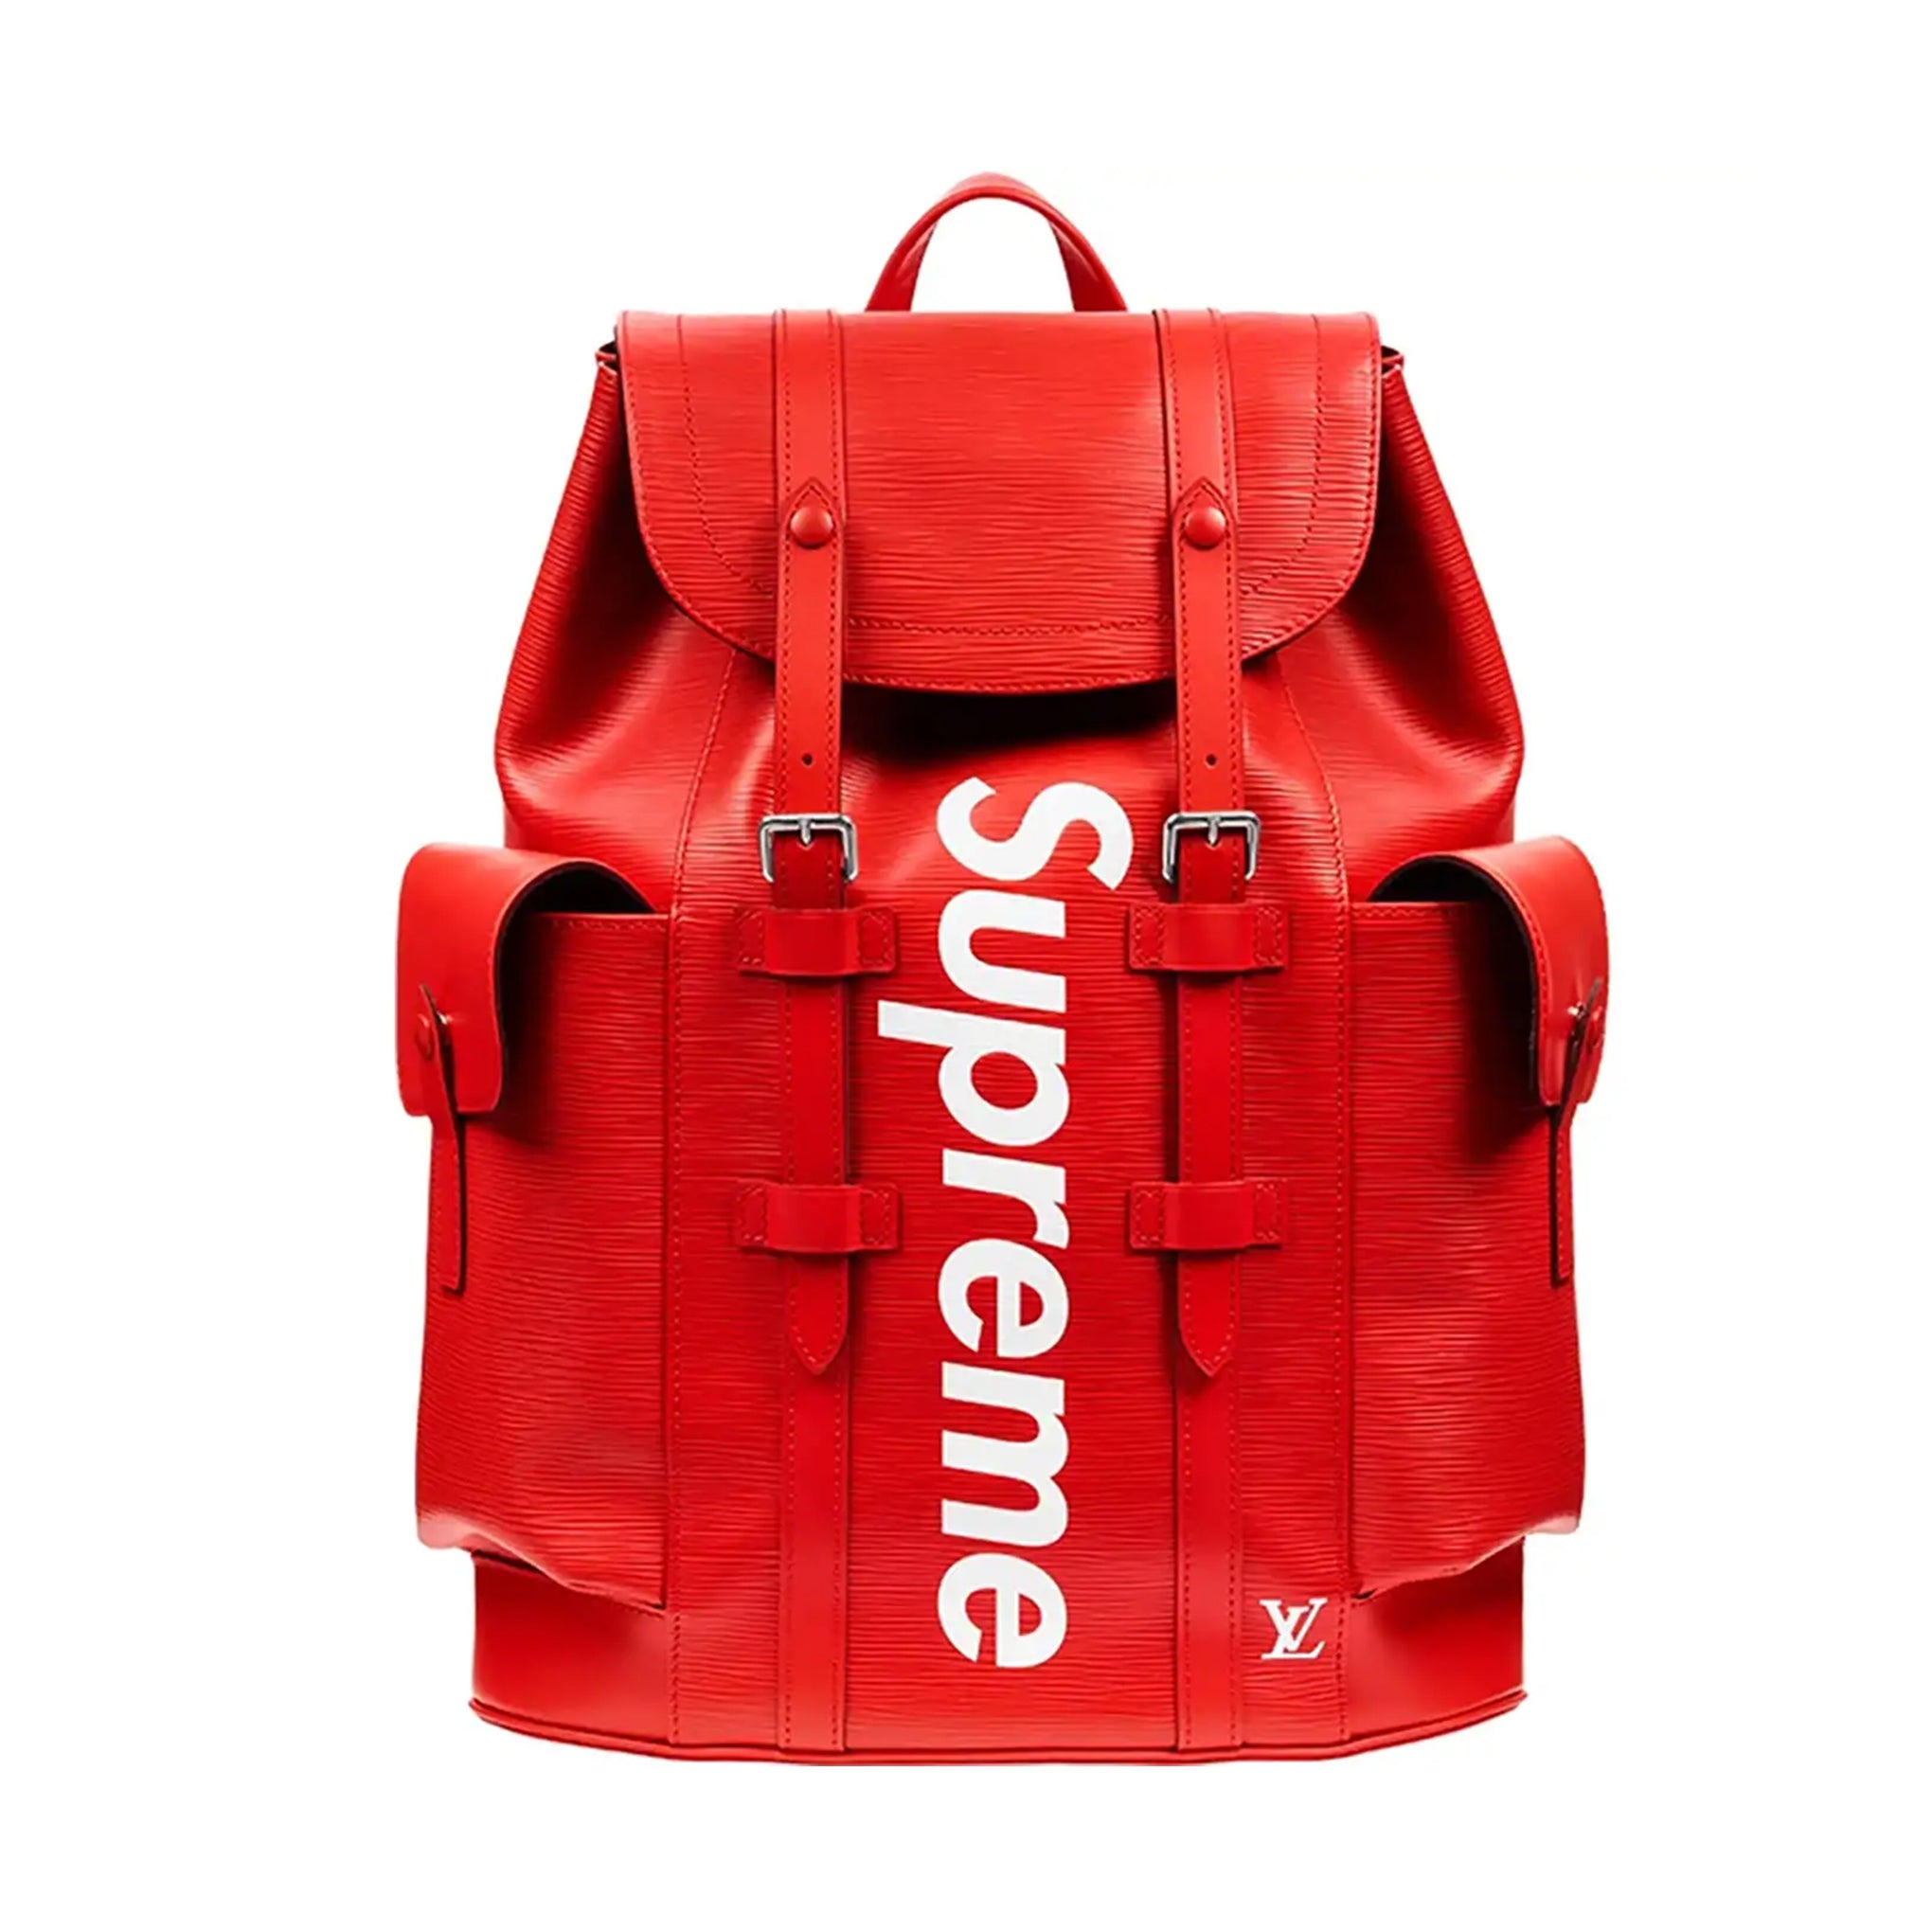 LOUIS VUITTON SUPREME CHRISTOPHER BACKPACK RED